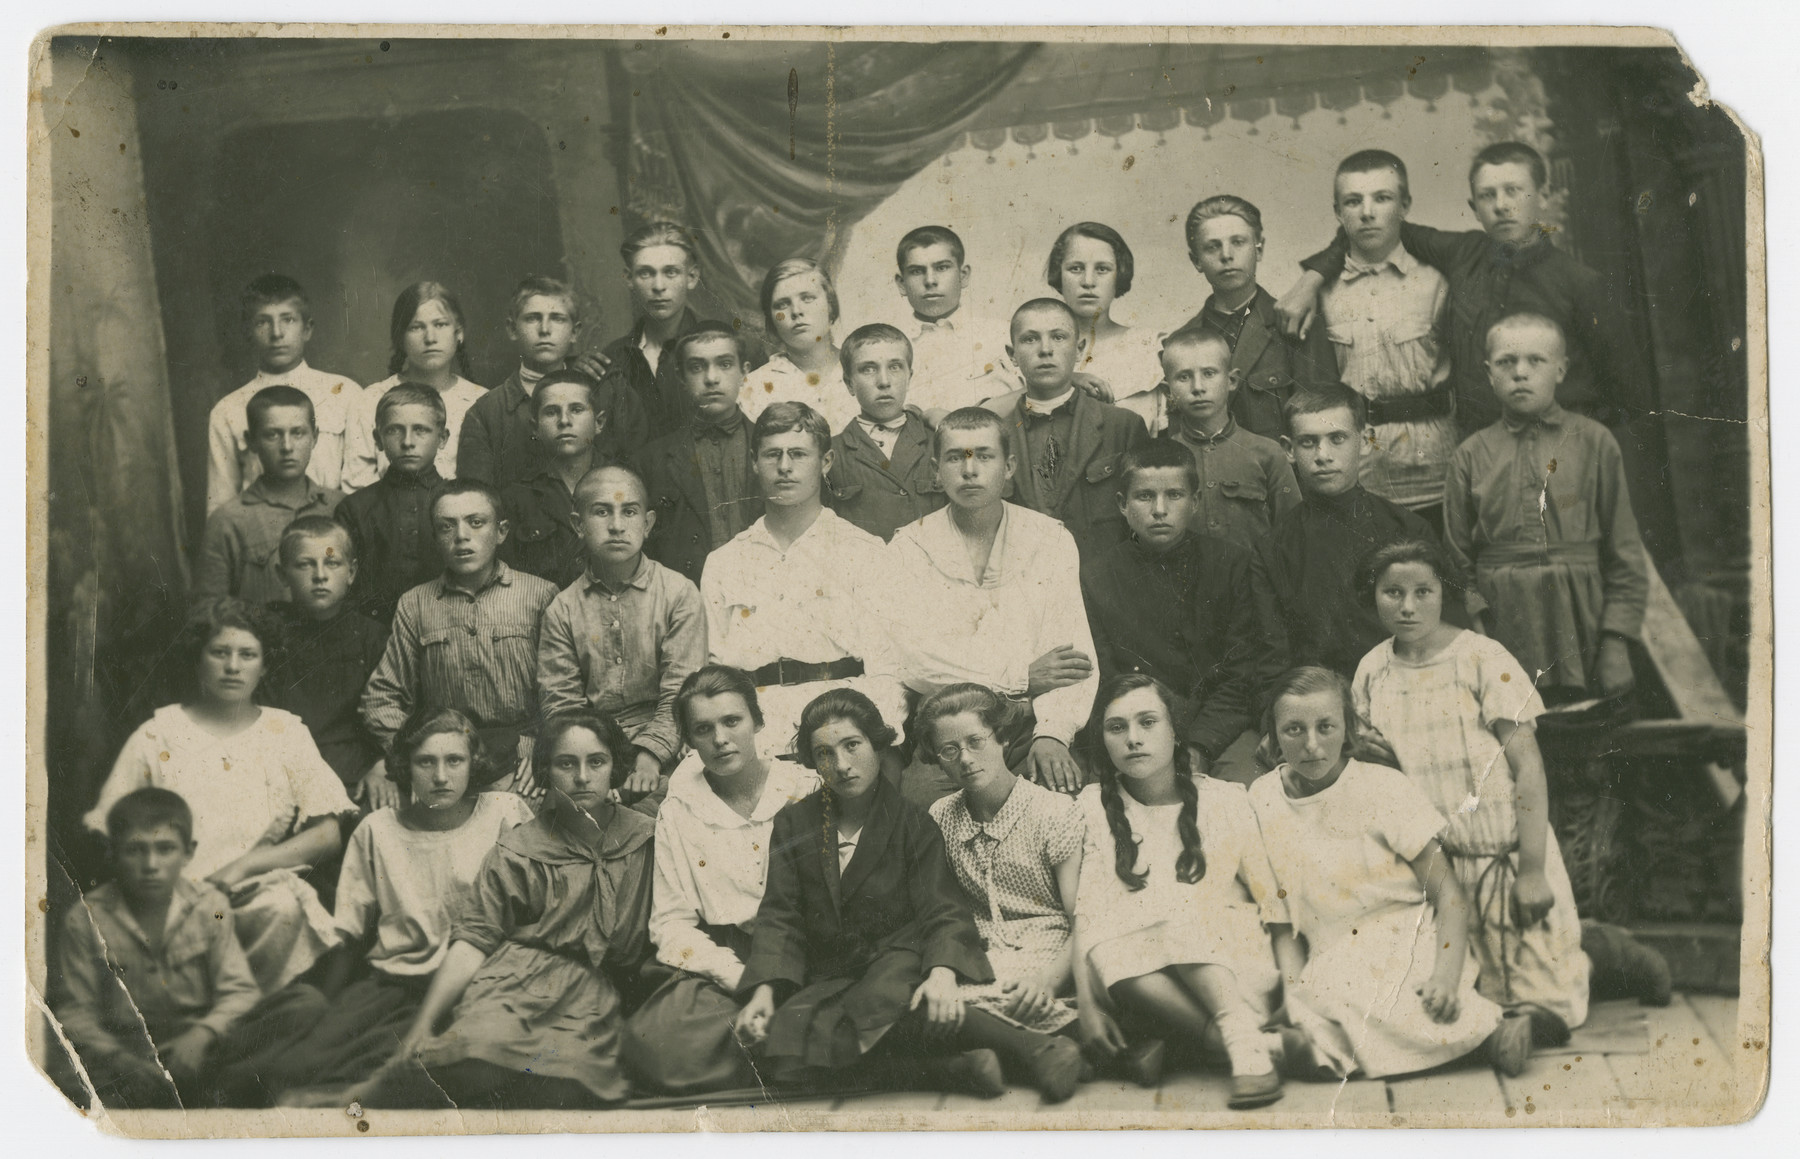 Group portrait of Jewish youth in Orinin, Ukraine.

Among those pictured is Mania Lechtman, who was one of the few survivors.